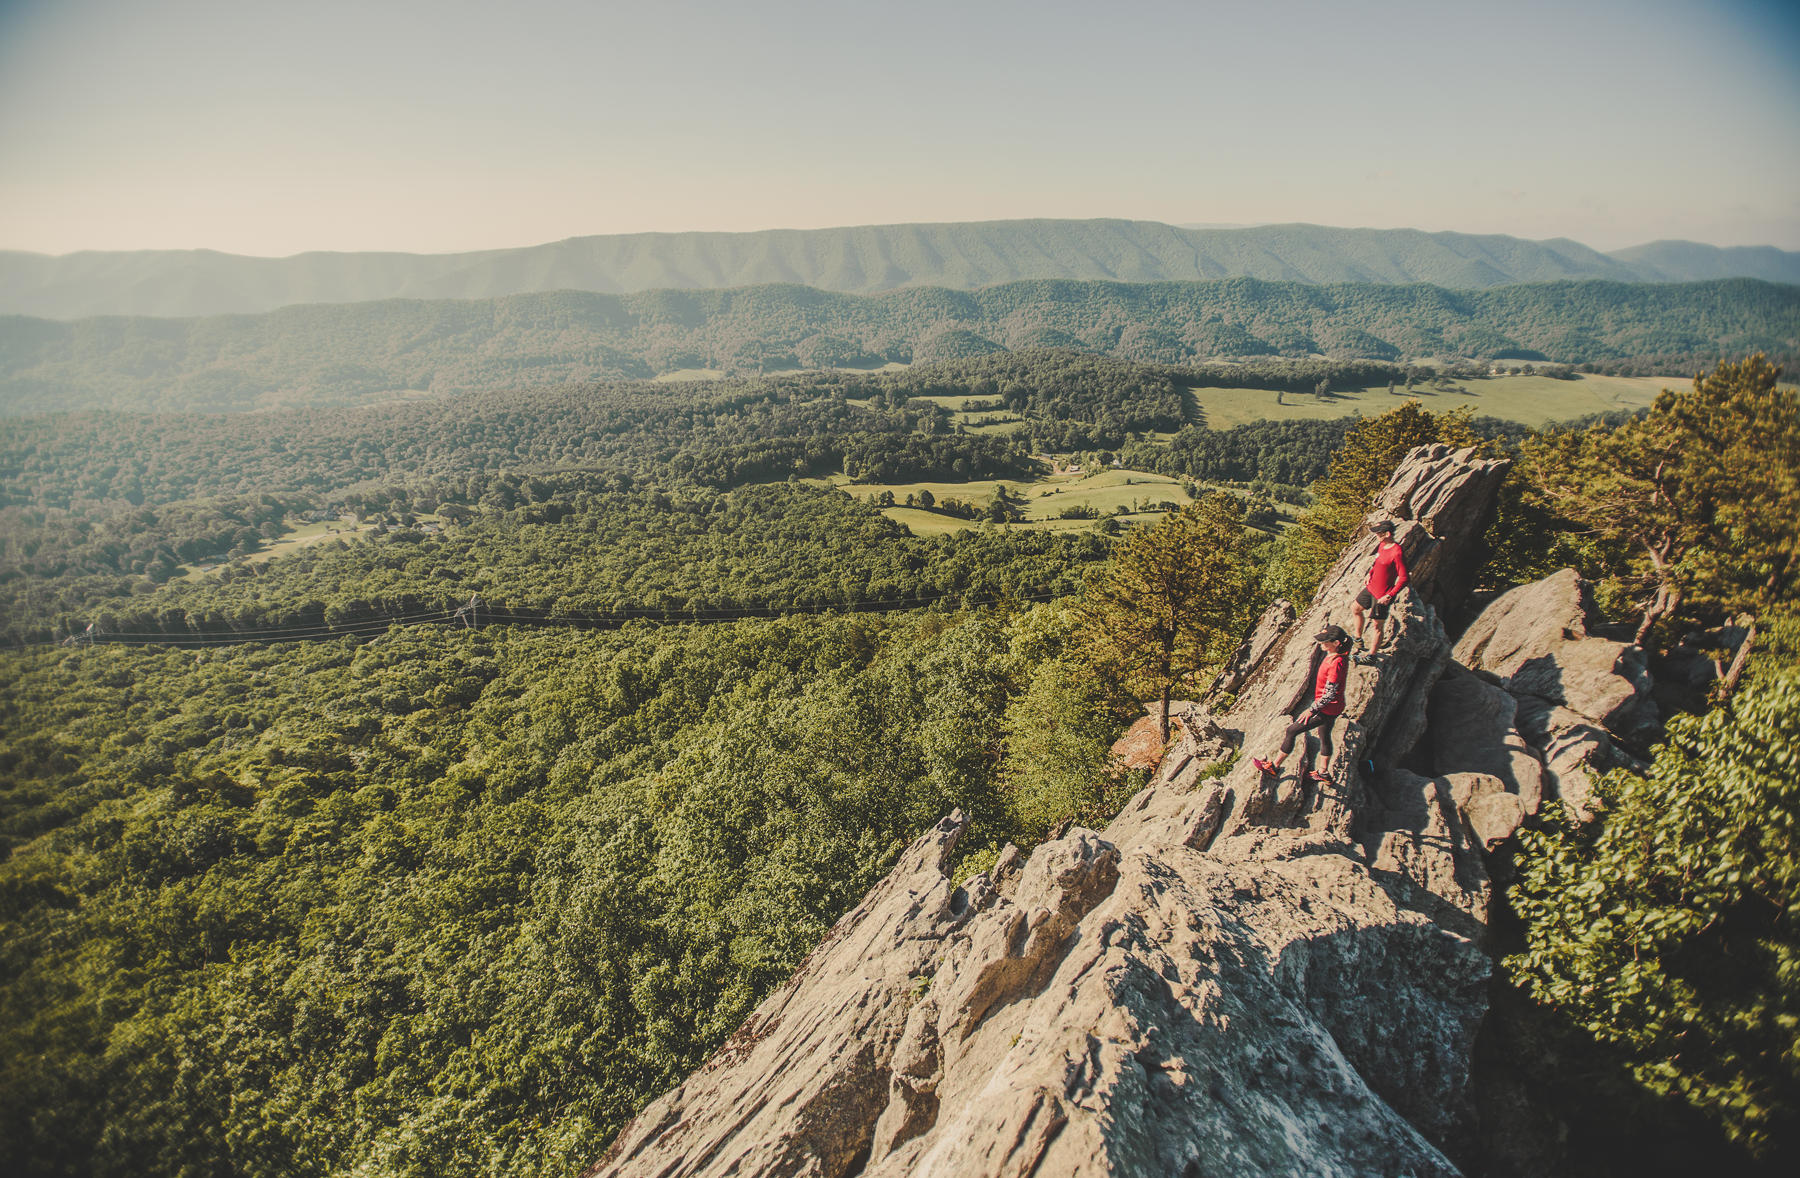 Dragon's Tooth is another famous hike along the Appalachian Trail known for fun rock scrambles and a tooth-like rock outcrop at the summit for a rewarding view of the Blue Ridge Mountains in Roanoke.